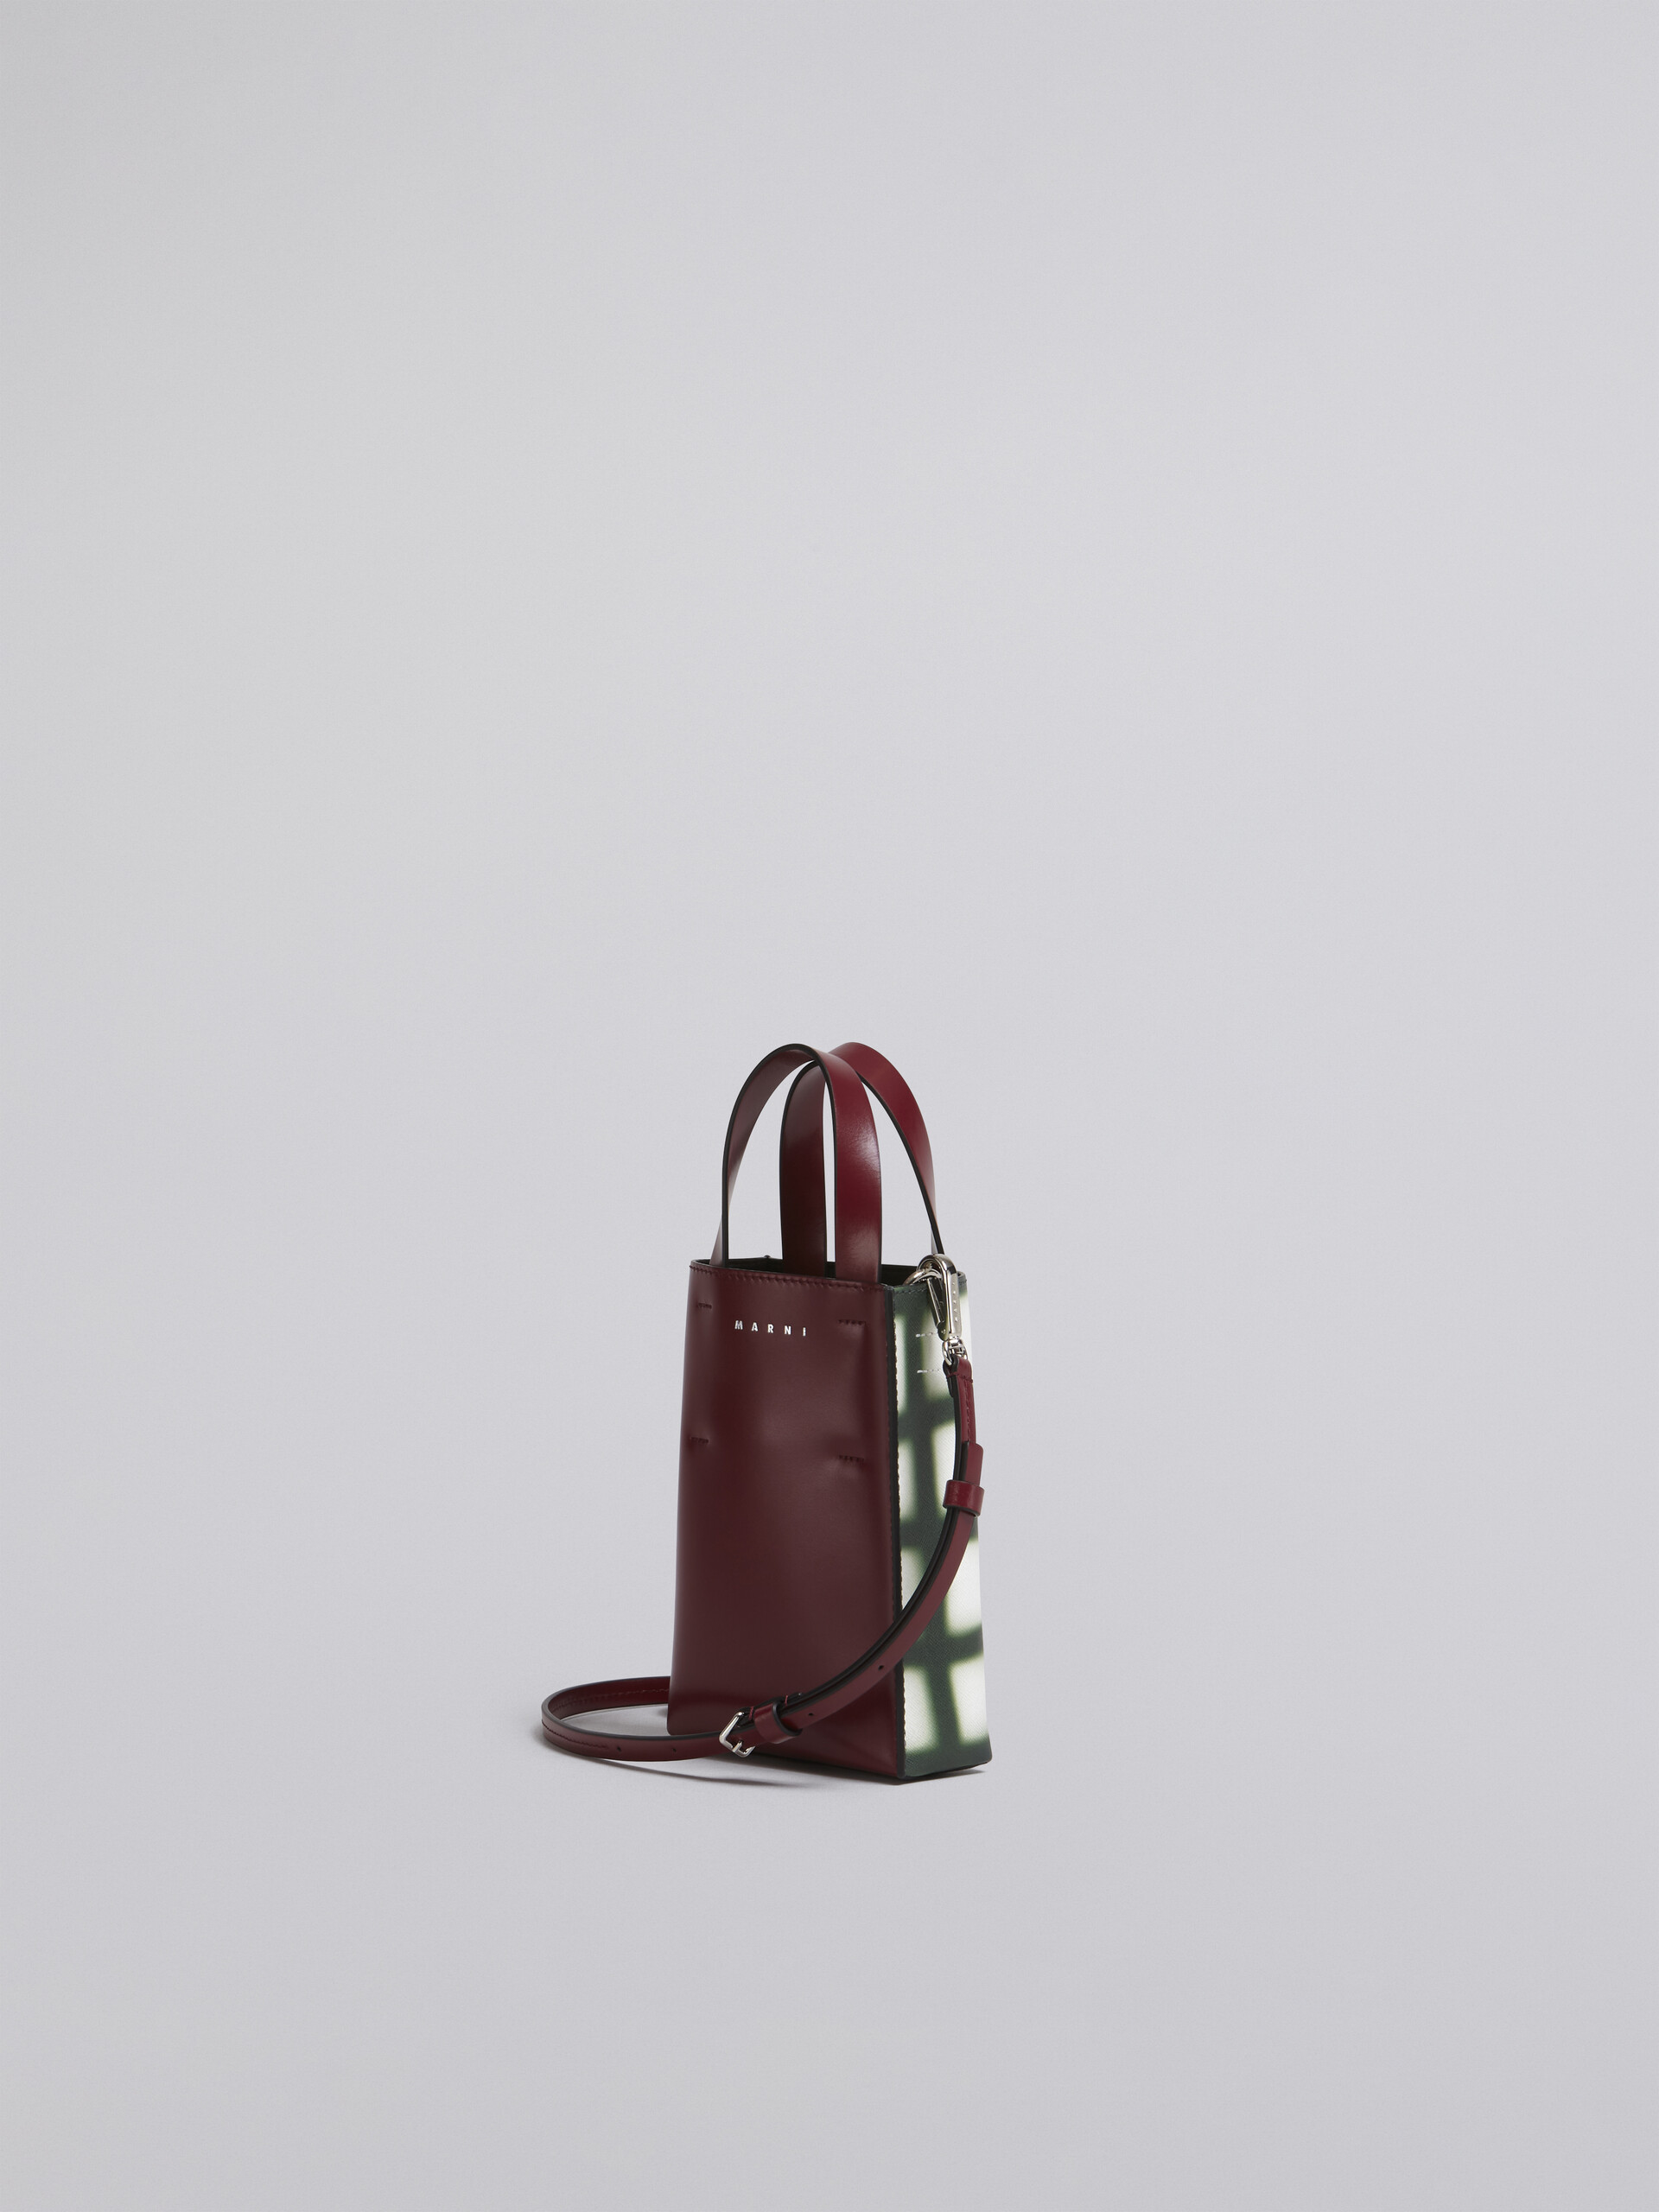 MUSEO bag in check printed saffiano calfskin - Shopping Bags - Image 2